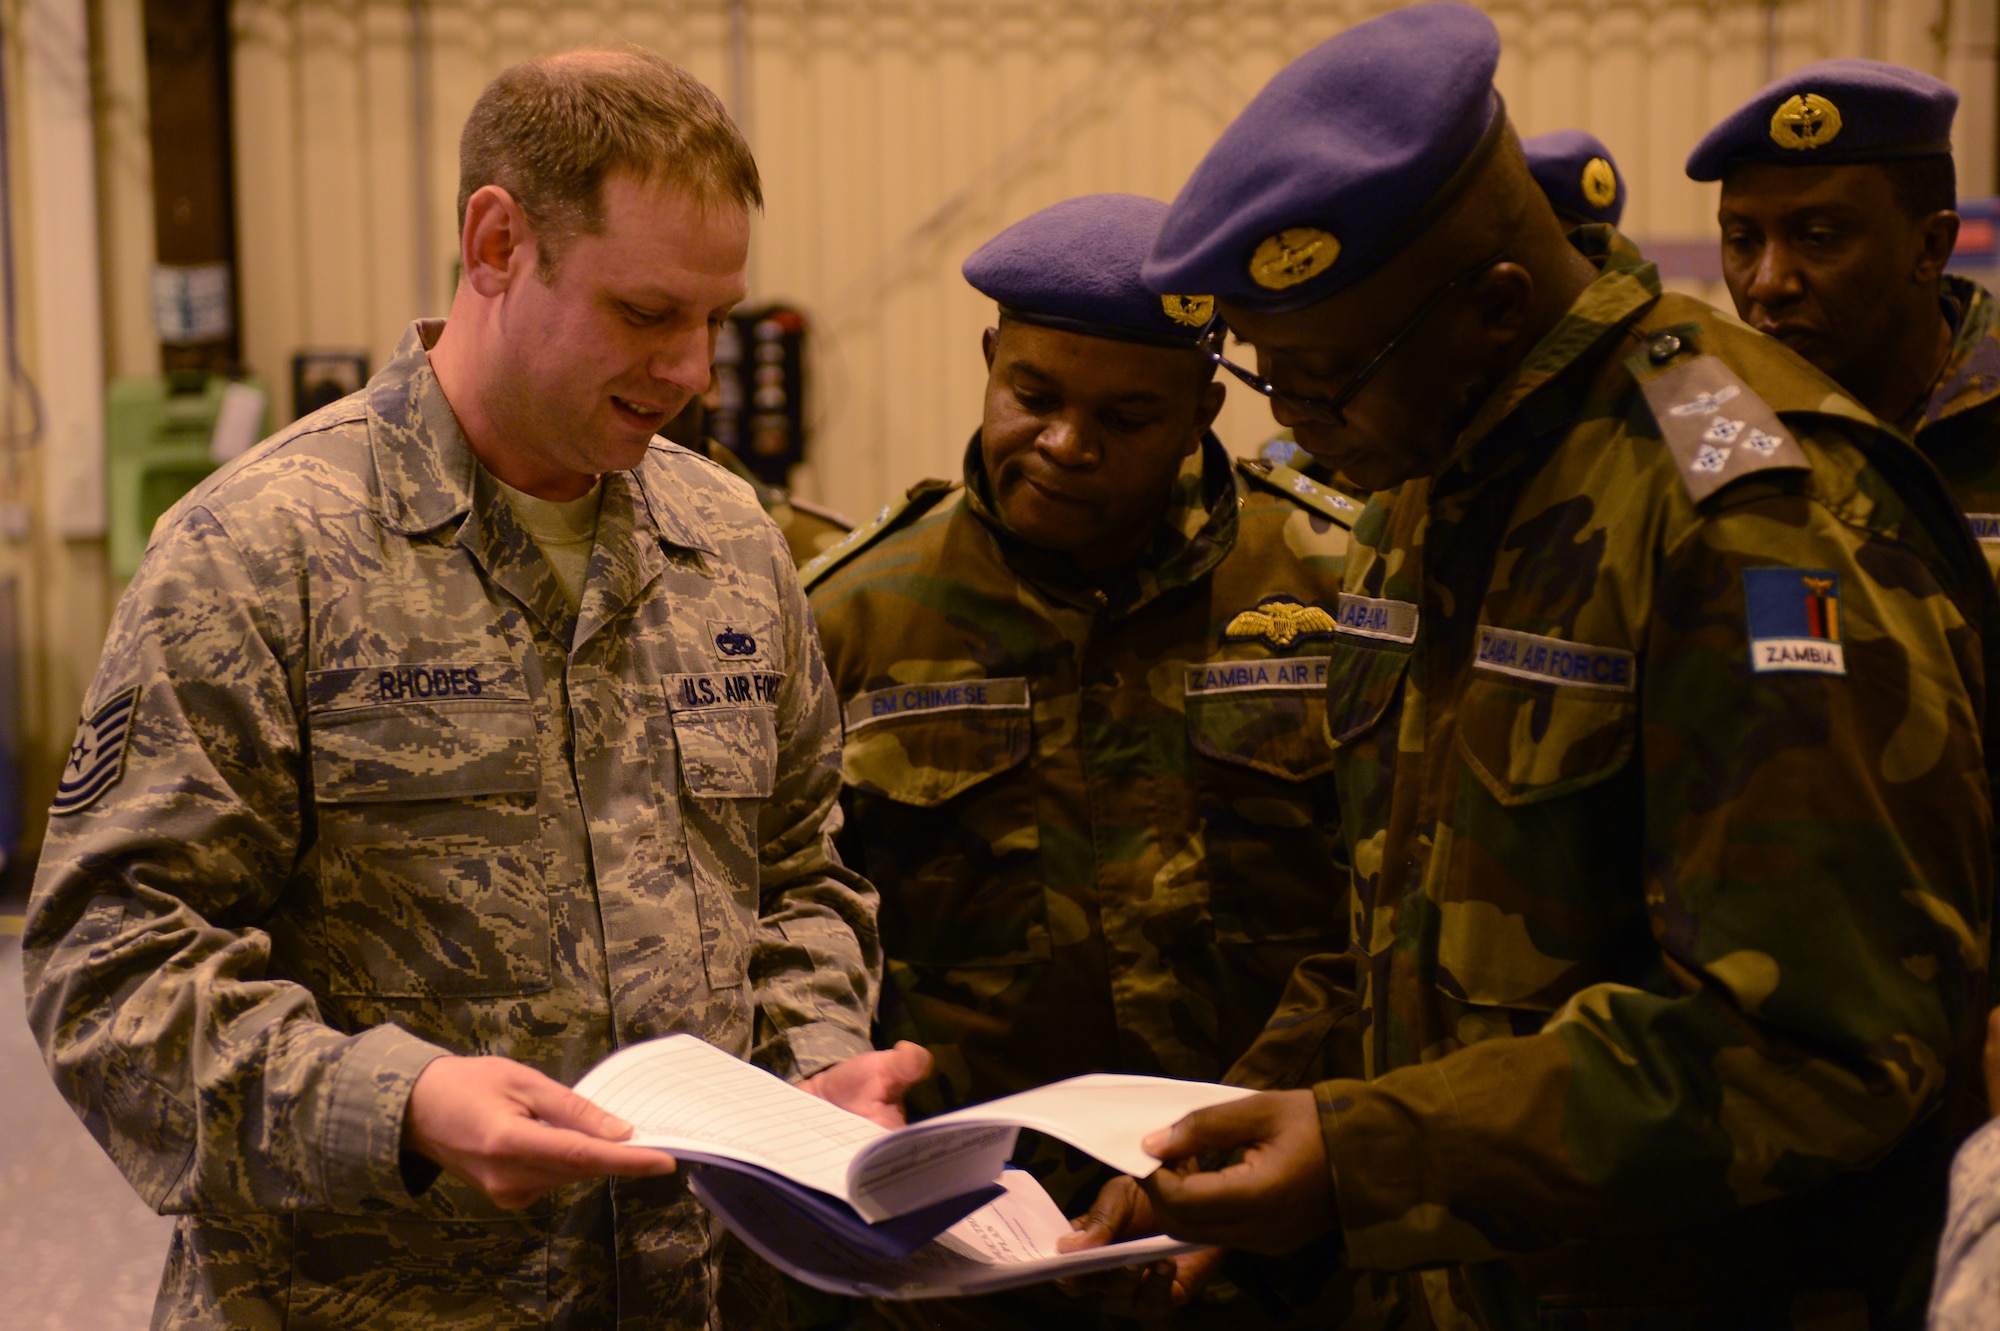 Tech. Sgt. Michael Rhodes, 86th Maintenance Squadron aircraft structural maintenance section chief, provides information to Zambian air forces on the technical training an Air Force Airman receives, May 1, 2013, Ramstein Air Base, Germany. The visit gave the Zambian air force a chance to further military relations and improve the partnership between the U.S. and Zambian air forces. (U.S. Air Force photo/Senior Airman Caitlin O’Neil-McKeown)